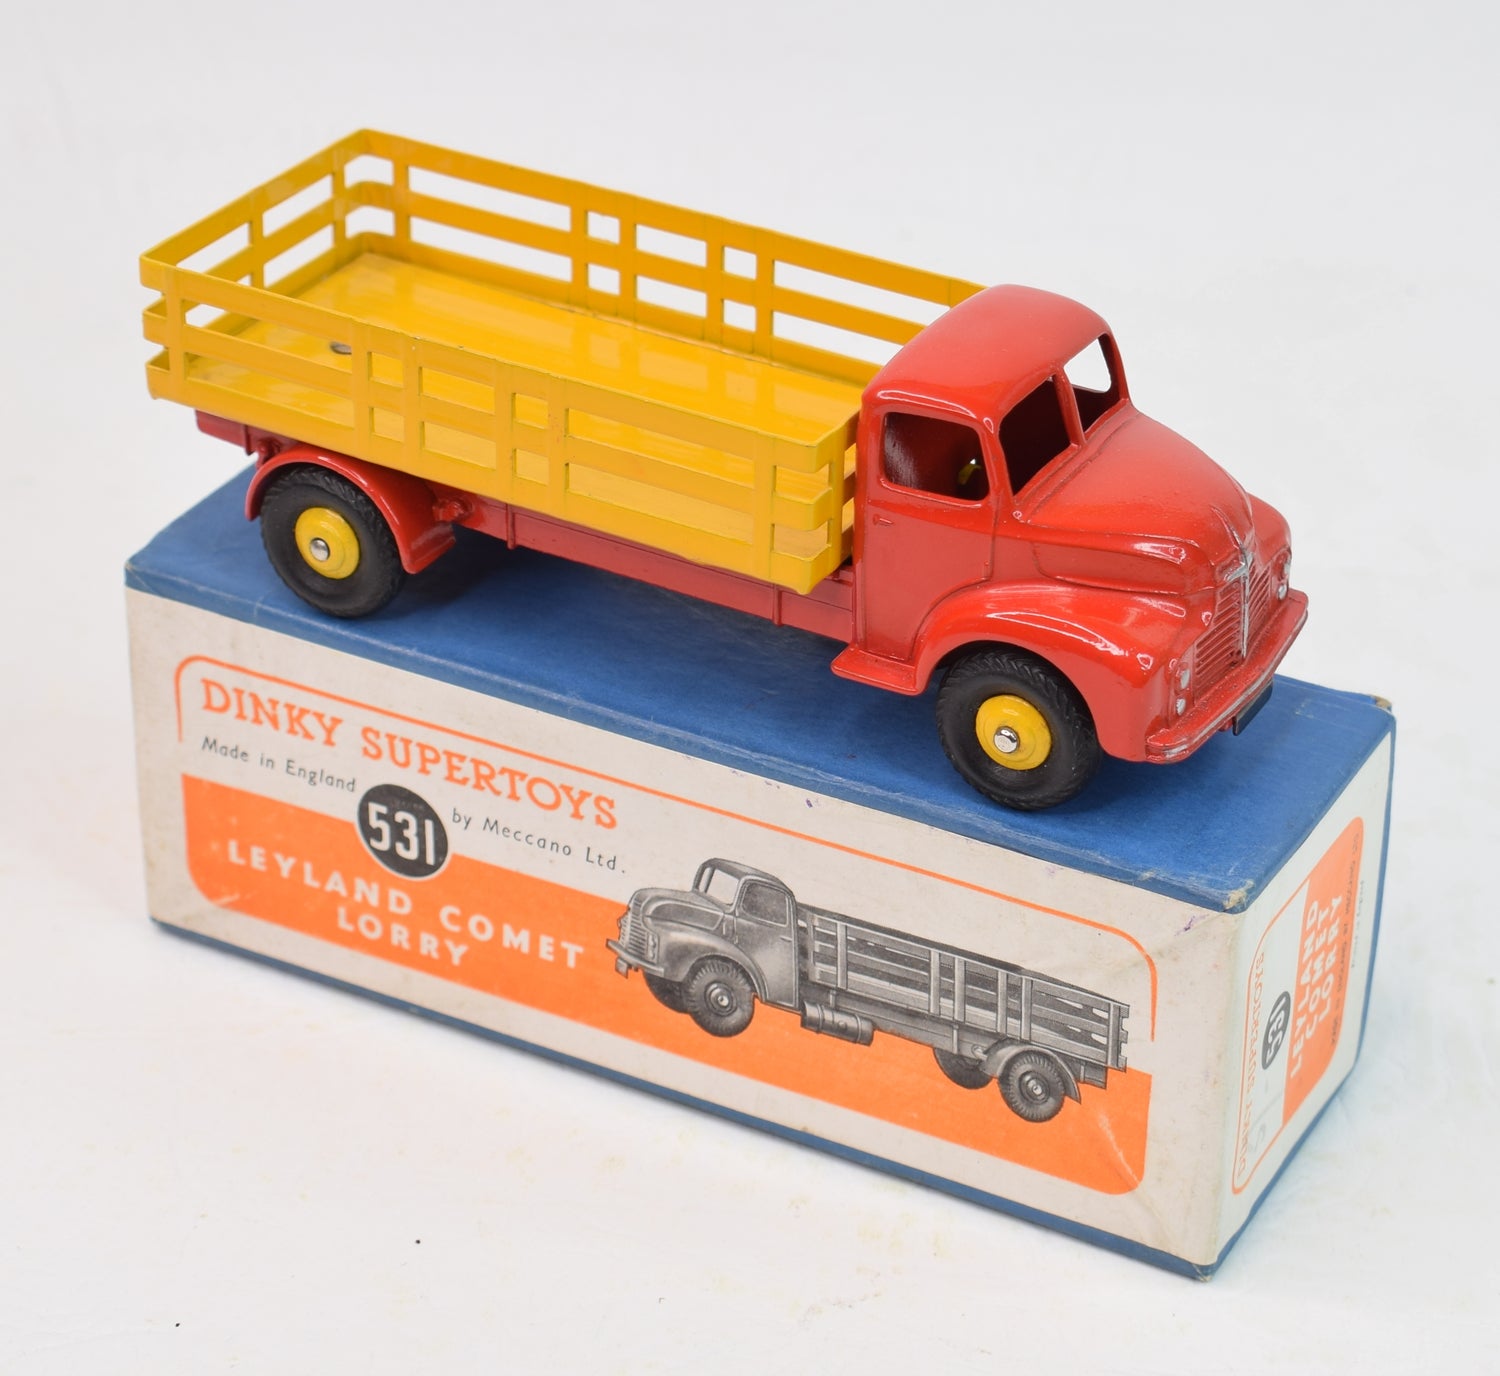 Dinky Toys 531 Leyland Comet Lorry Very Near Mint/Boxed 'Moorgate' Collection